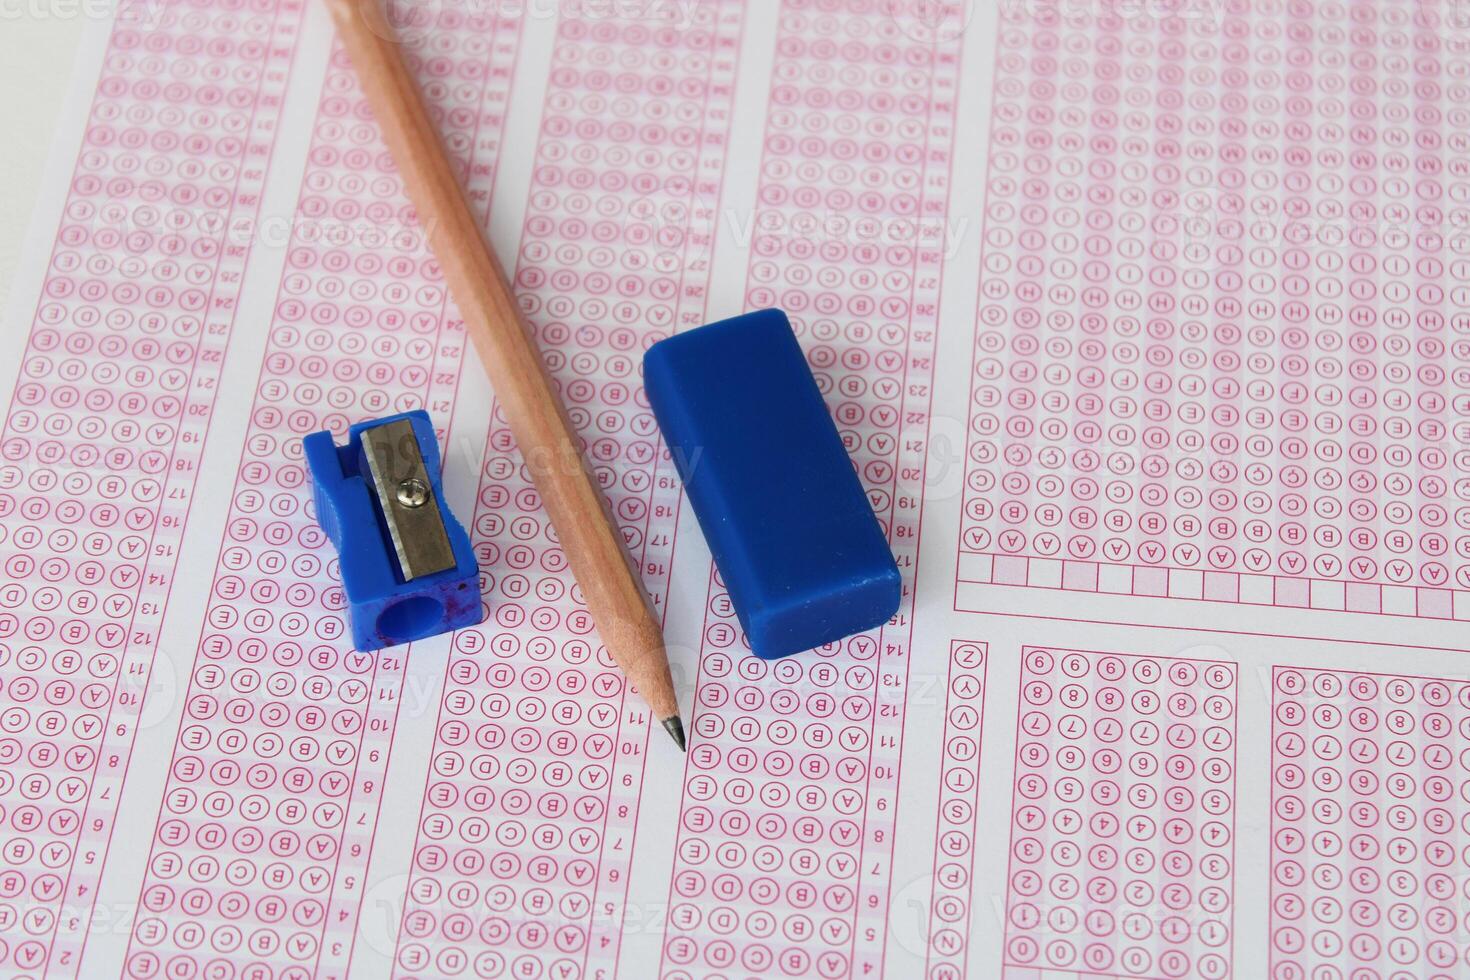 Pencil and eraser on the optical form. photo